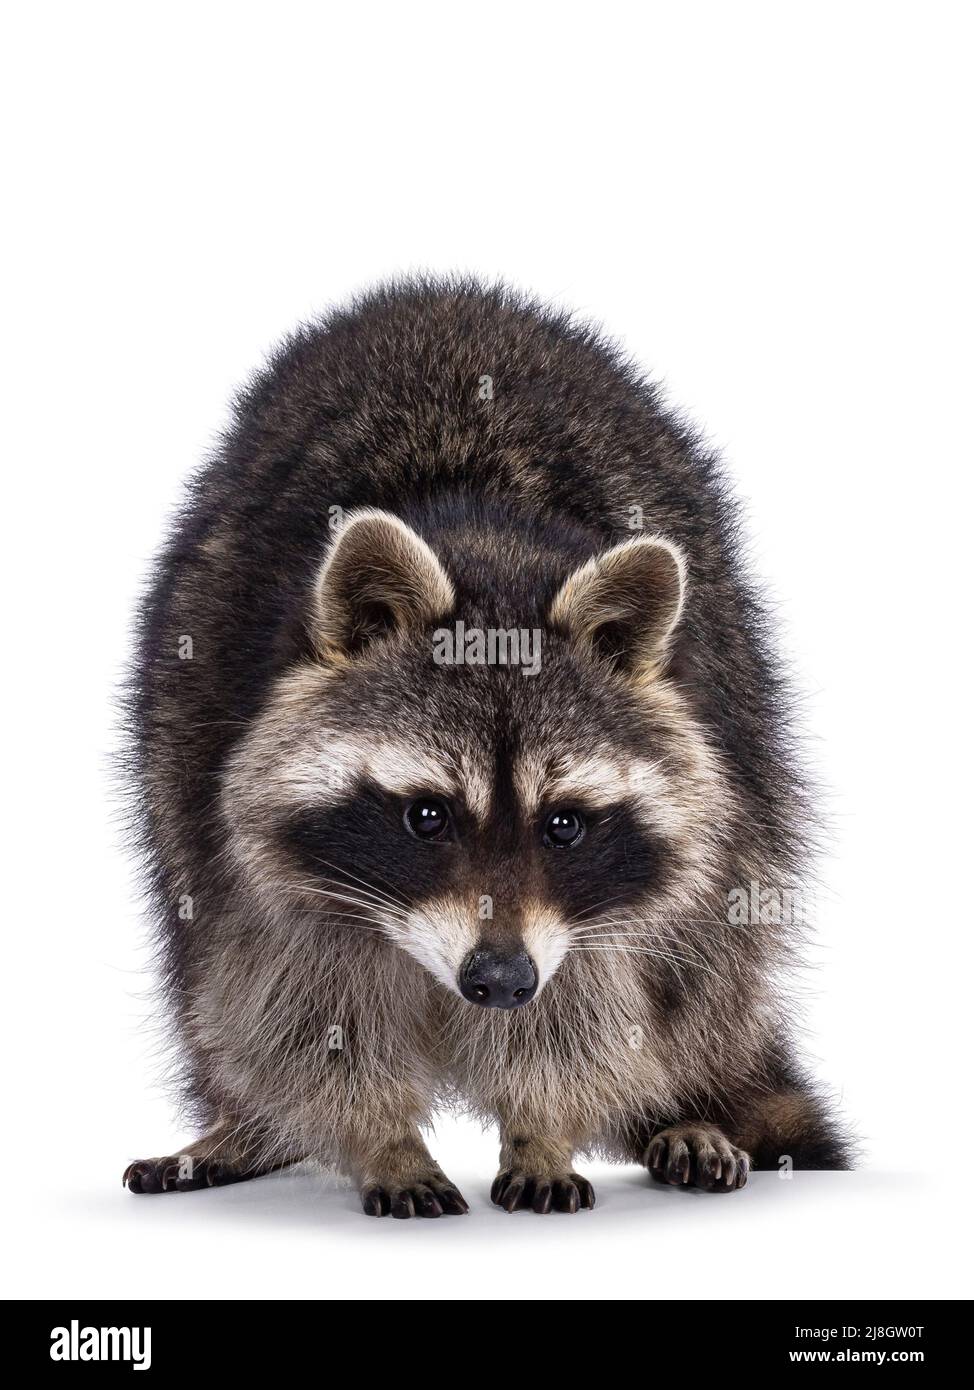 Head shot of cute Raccoon aka procyon lotor, standing facing front. Looking to the camera. Isolated on a white background. Stock Photo